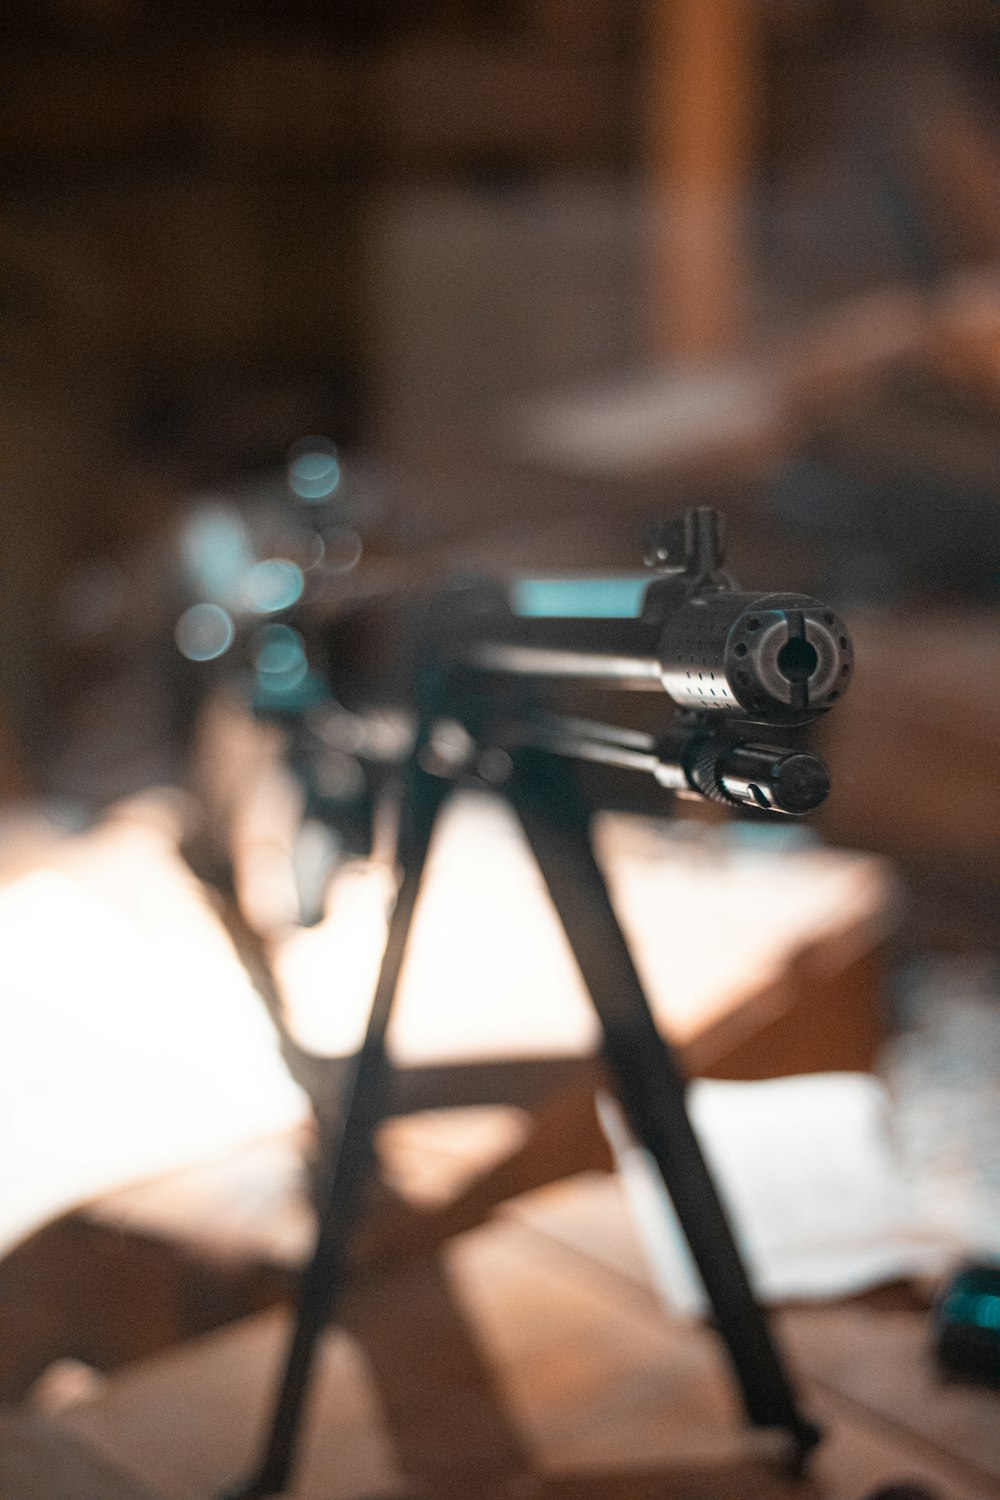 a close up of a toy gun on a table